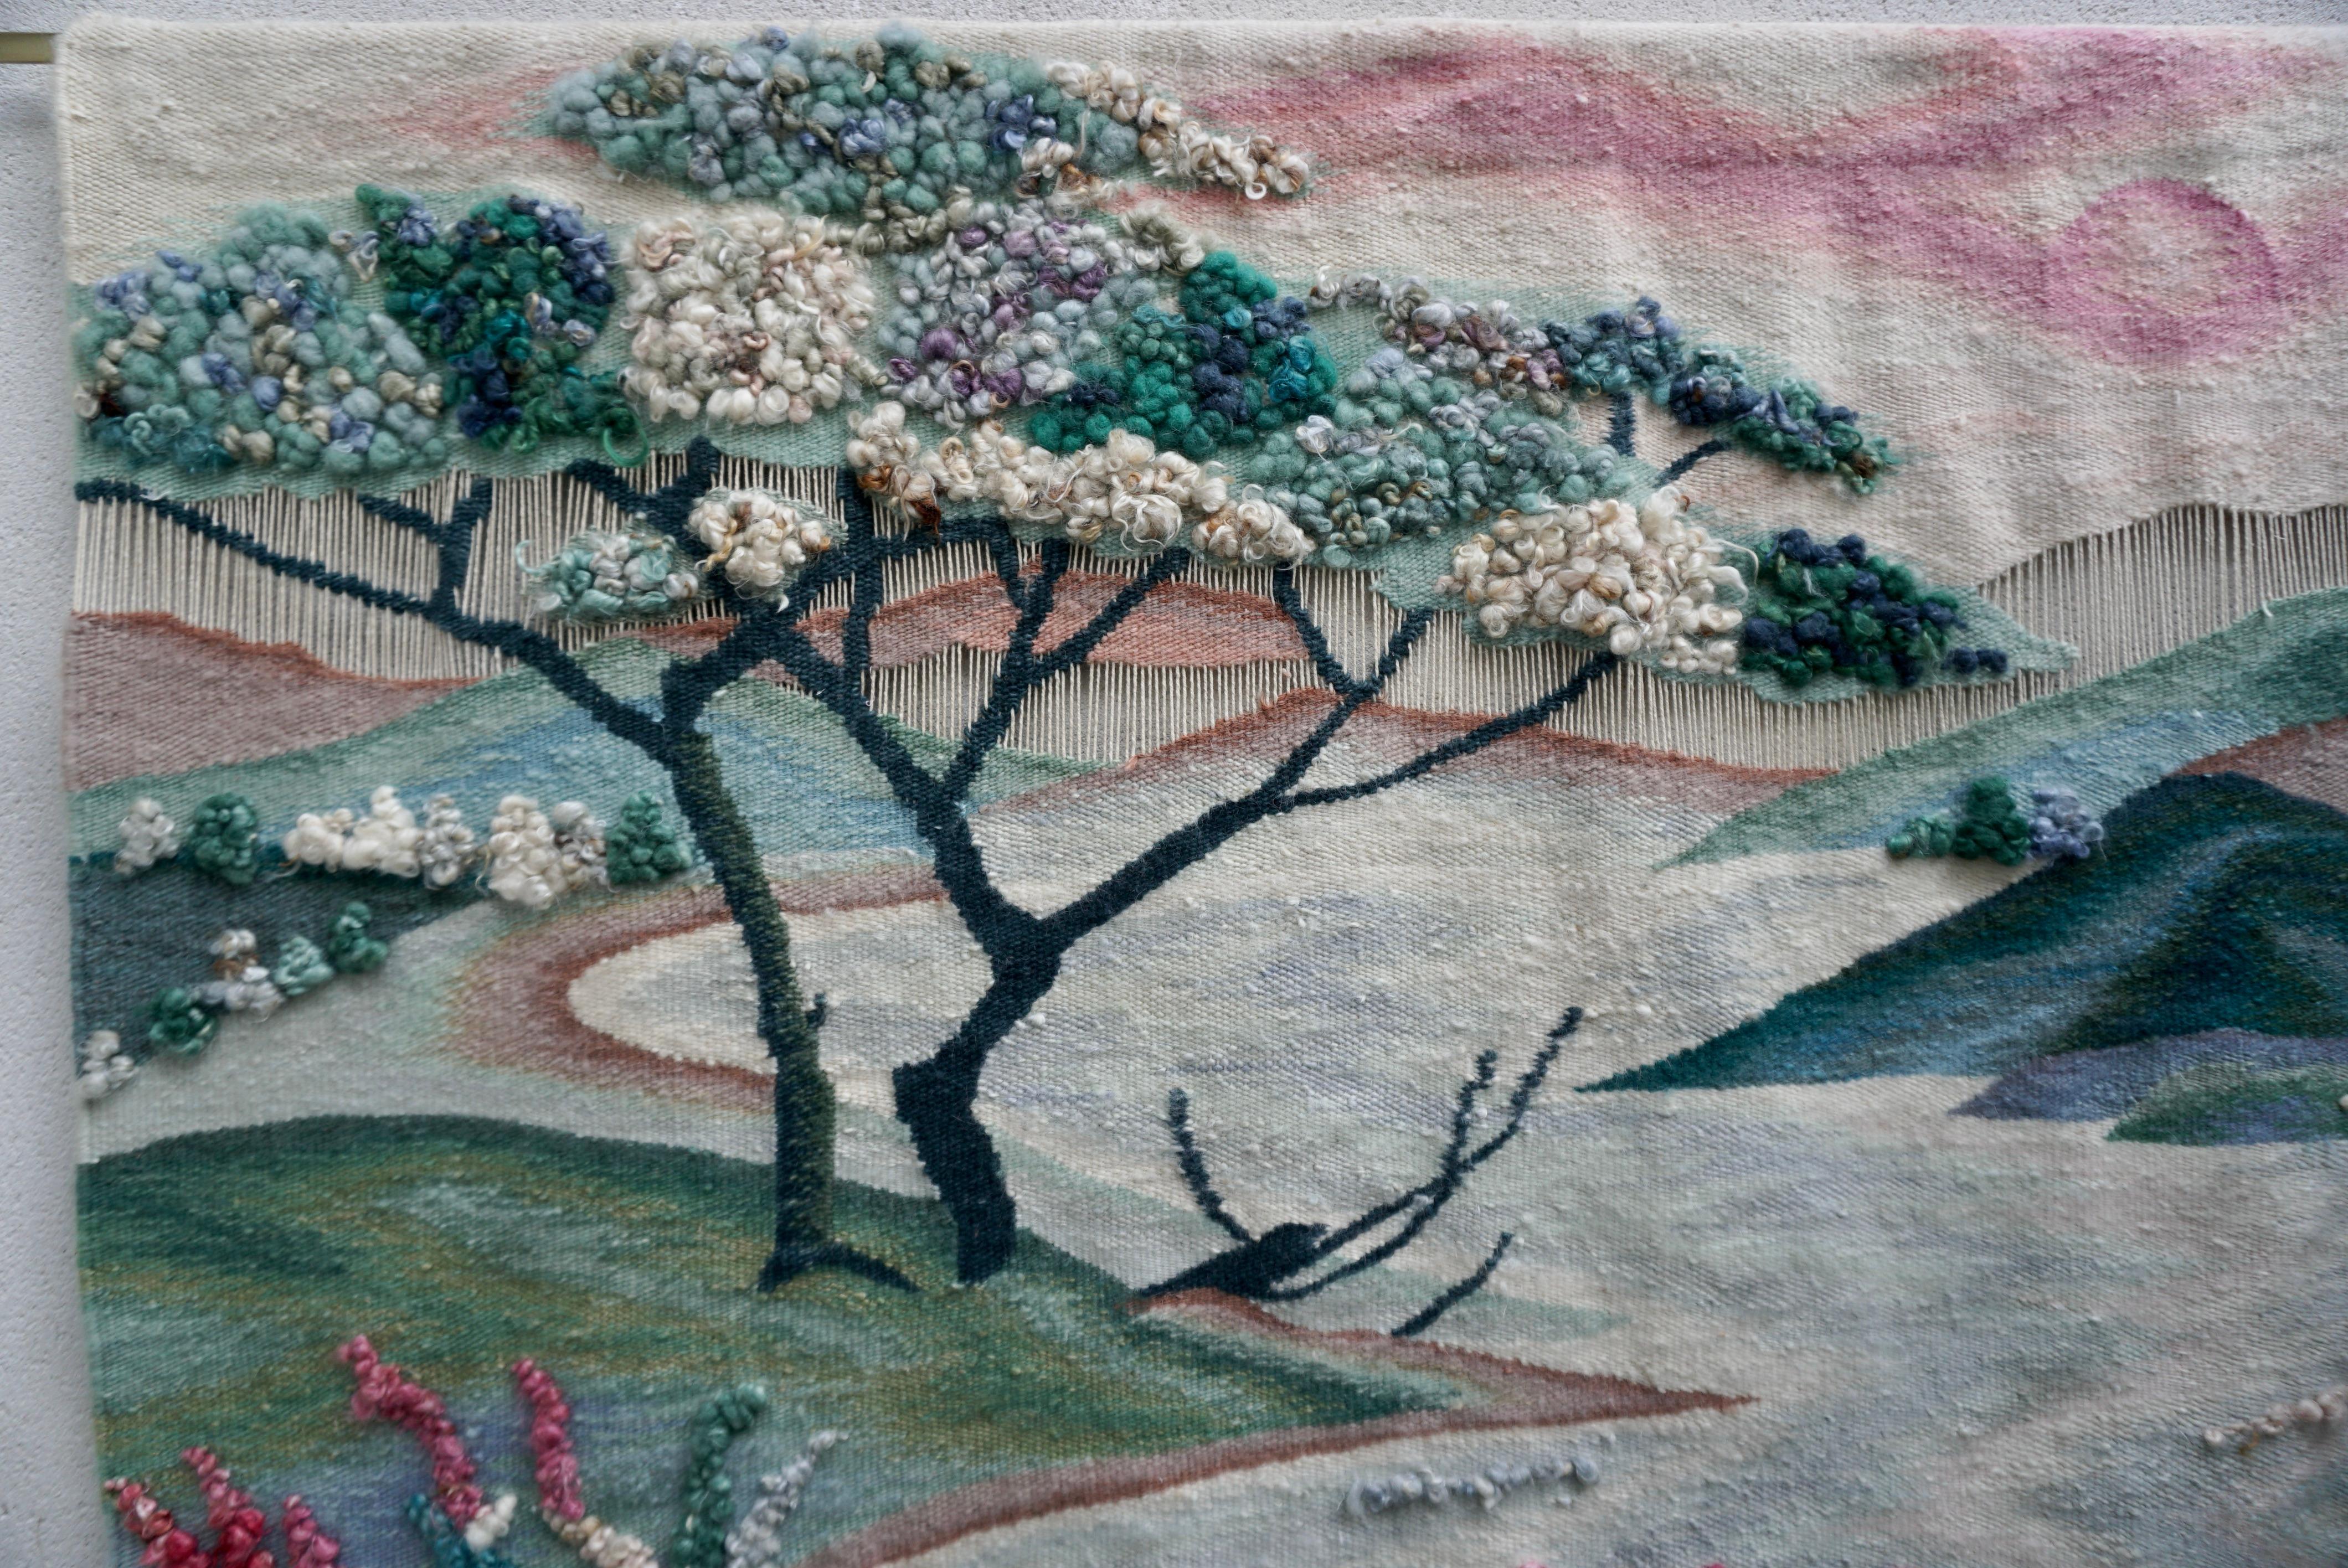 Beautiful contemporary hand knotted wool landscape tapestry, ca. 1970-1980

Hand knotted on a vertical loom in wool, vegetable colours.
Perfect condition considering the age of the object.